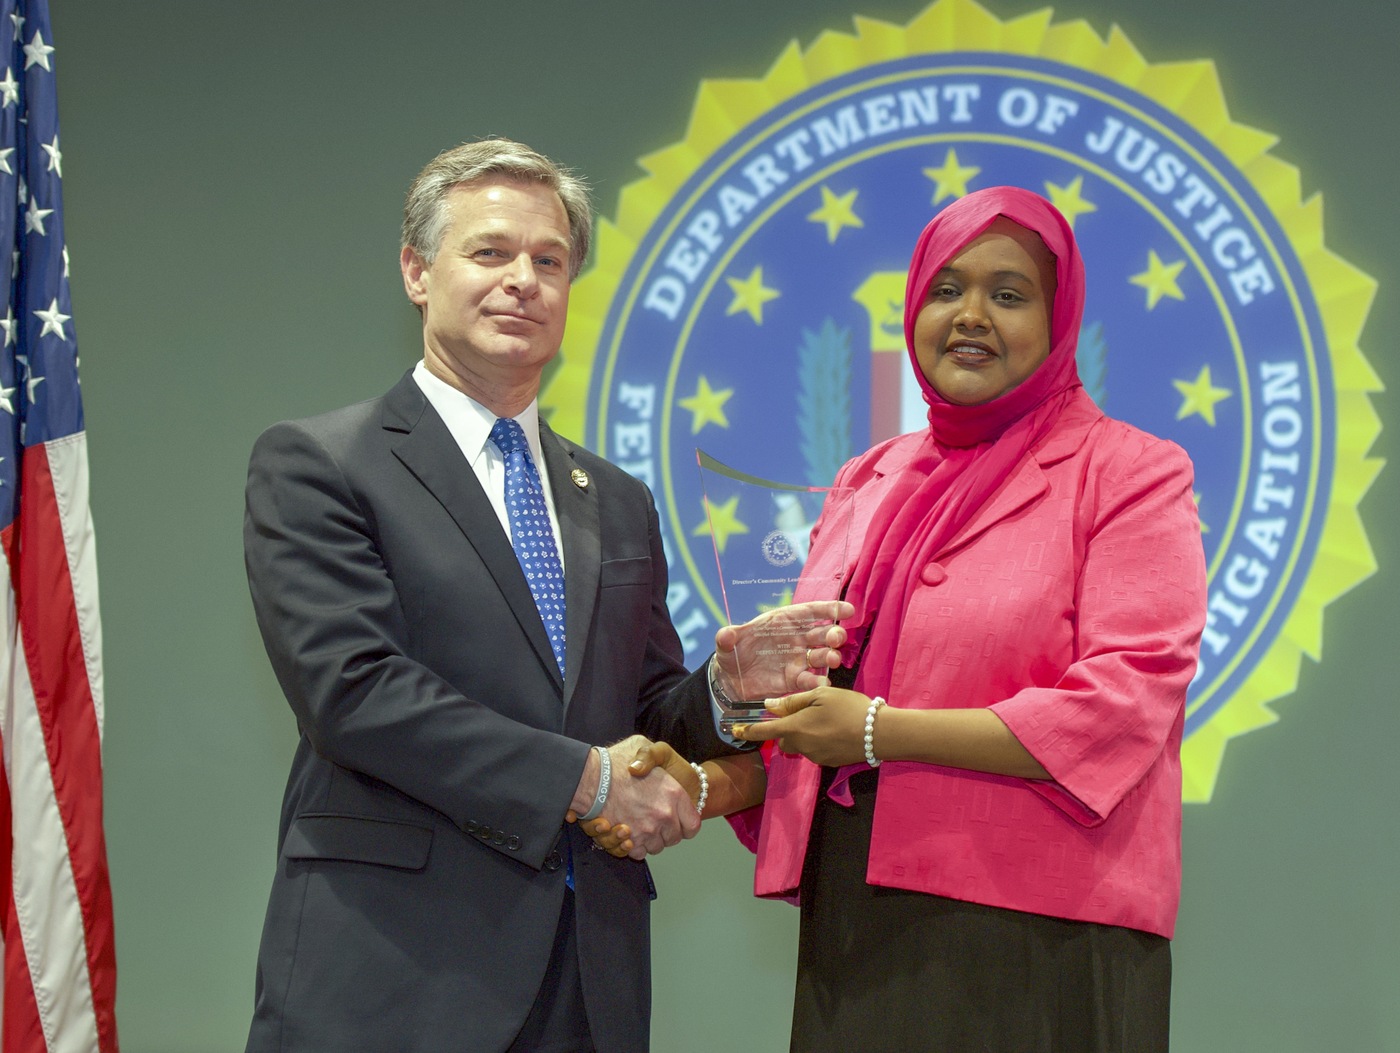 FBI Director Christopher Wray presents Boston Division recipient Deeqo Jibril with the Director’s Community Leadership Award (DCLA) at a ceremony at FBI Headquarters on May 3, 2019.